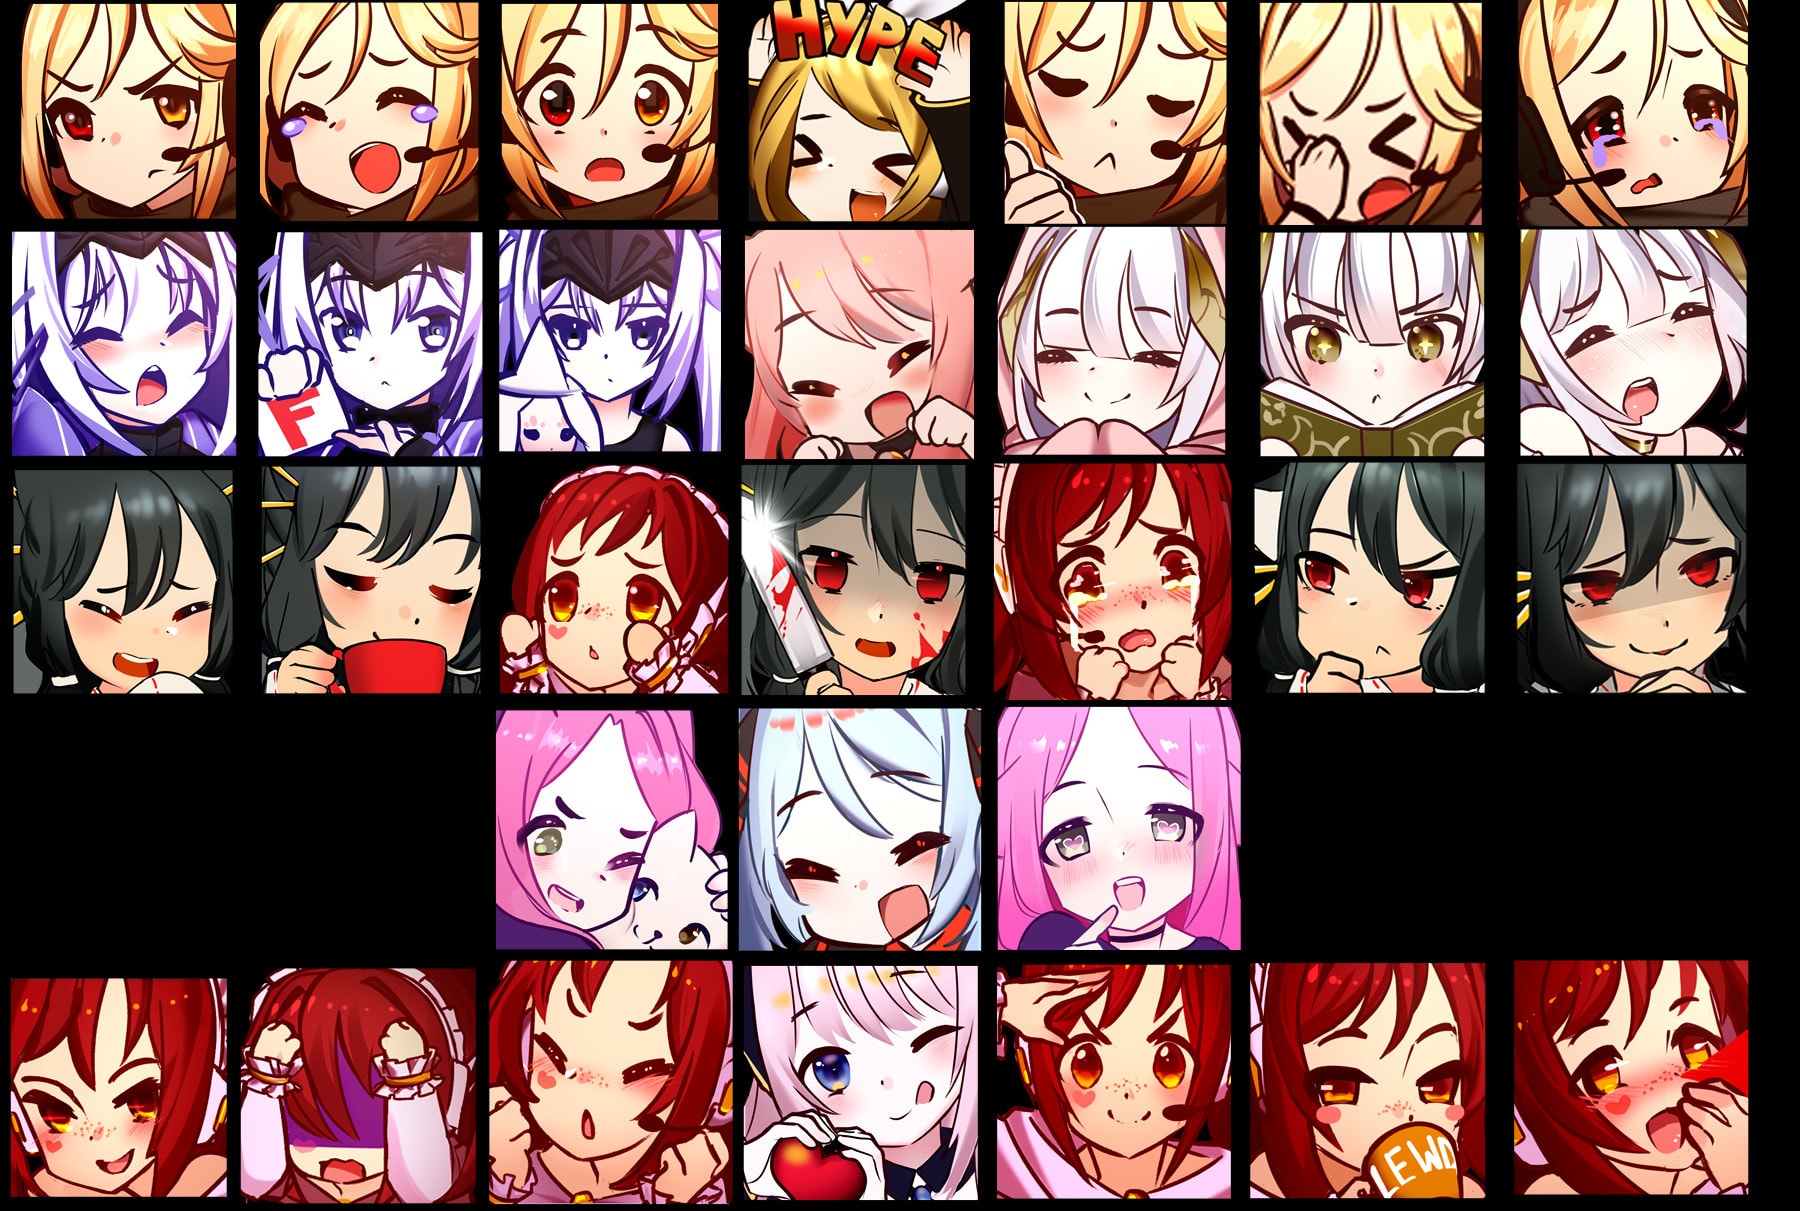 Art  Collectibles red hair girl anime twitch emotes discord emotes chibi emotes  twitch Twitch emotes Digital Drawing  Illustration etnacompe